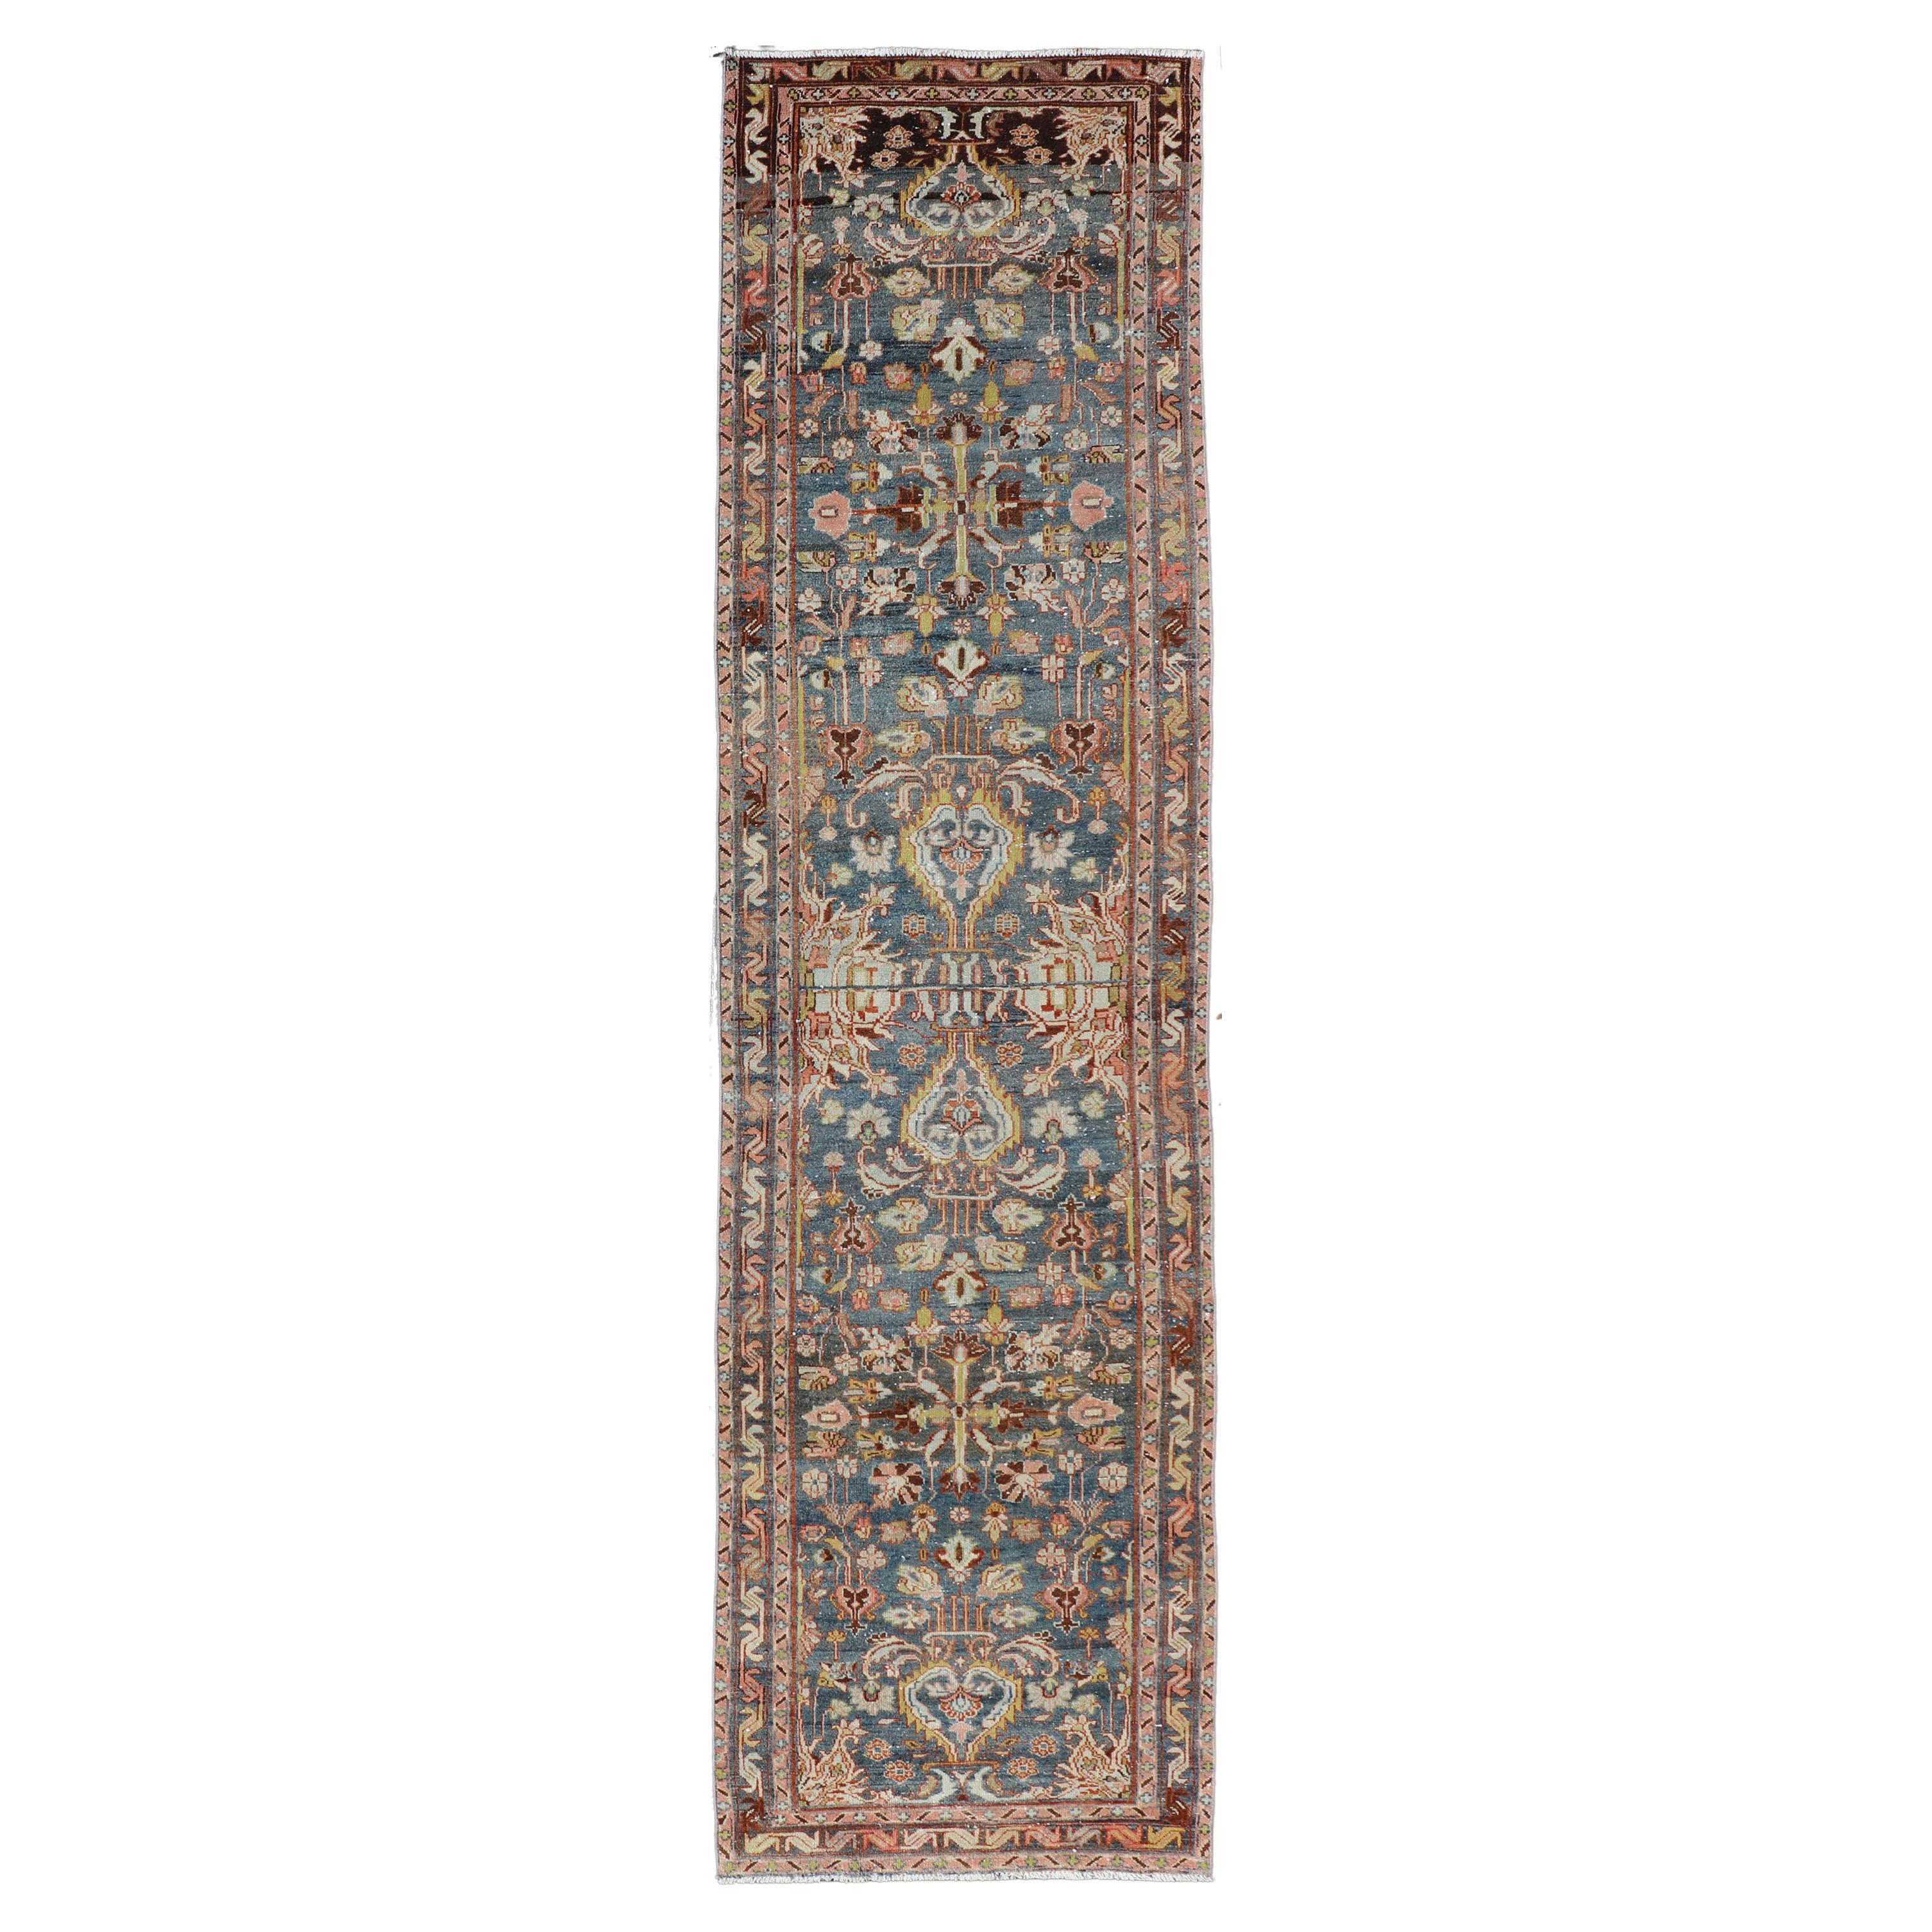 Antique Persian Malayer Runner All-Over Floral Design on a Blue Background